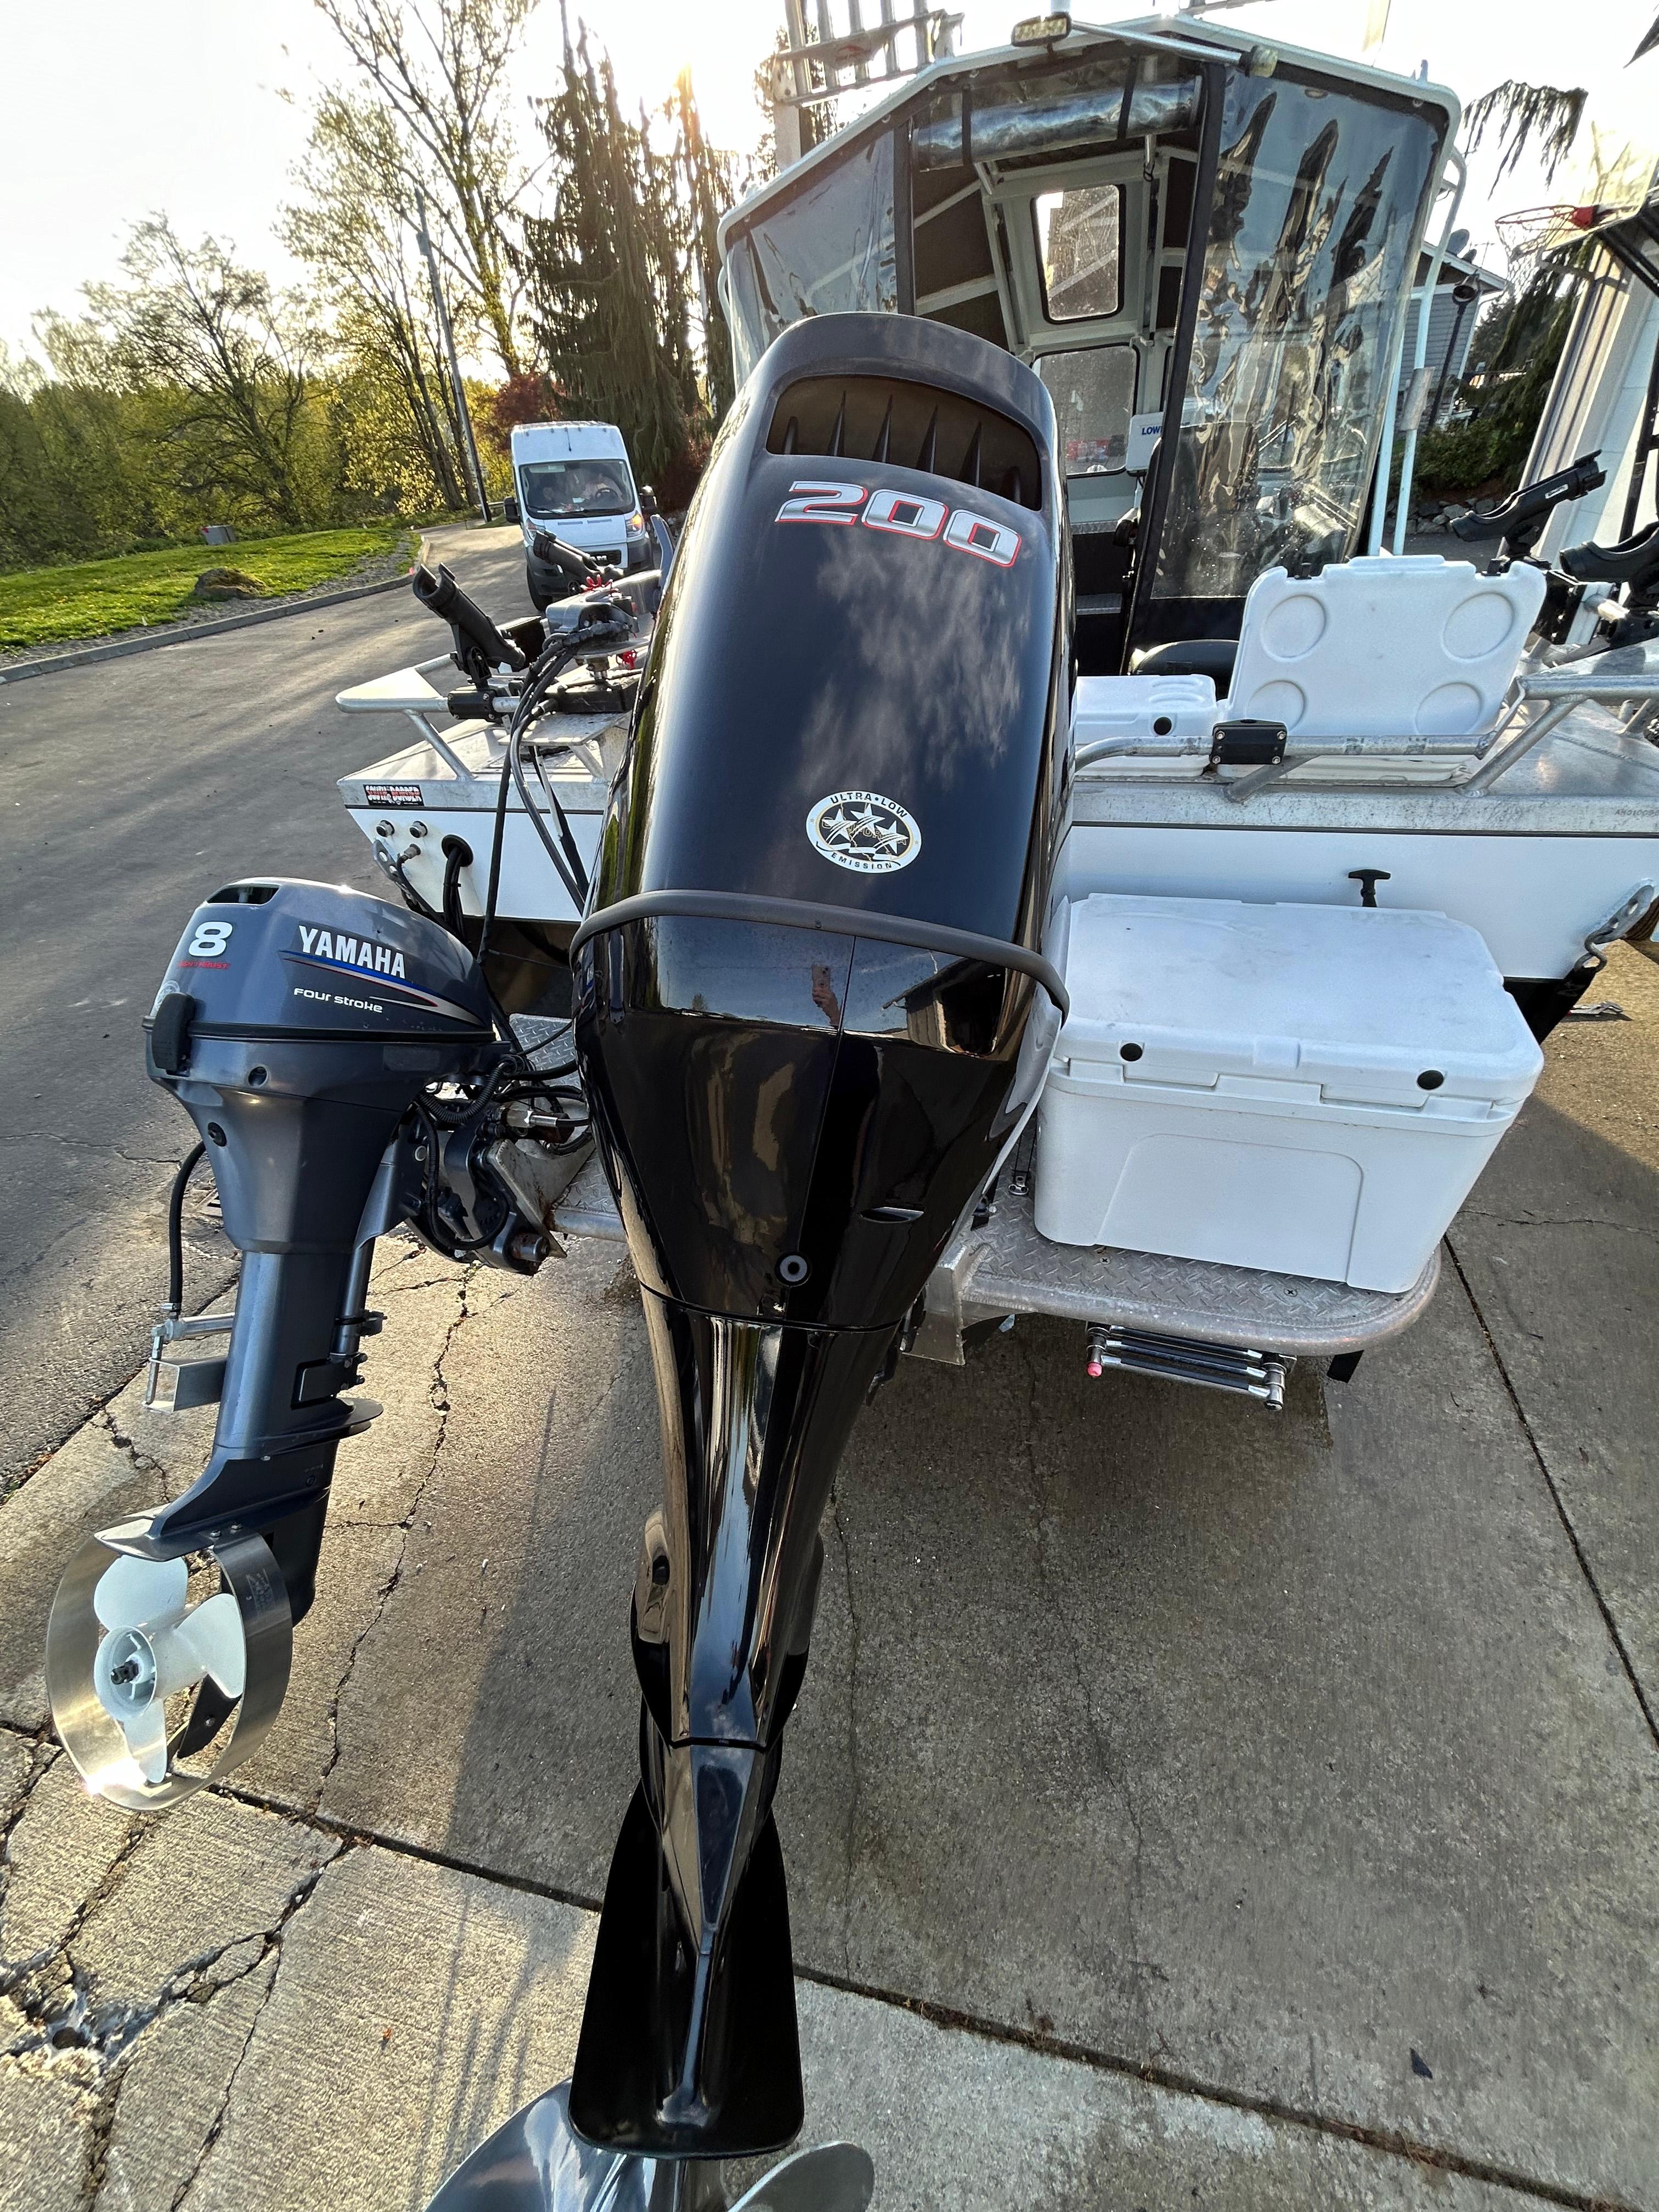 2008 Thunder Jet Luxor Outboard Offshore